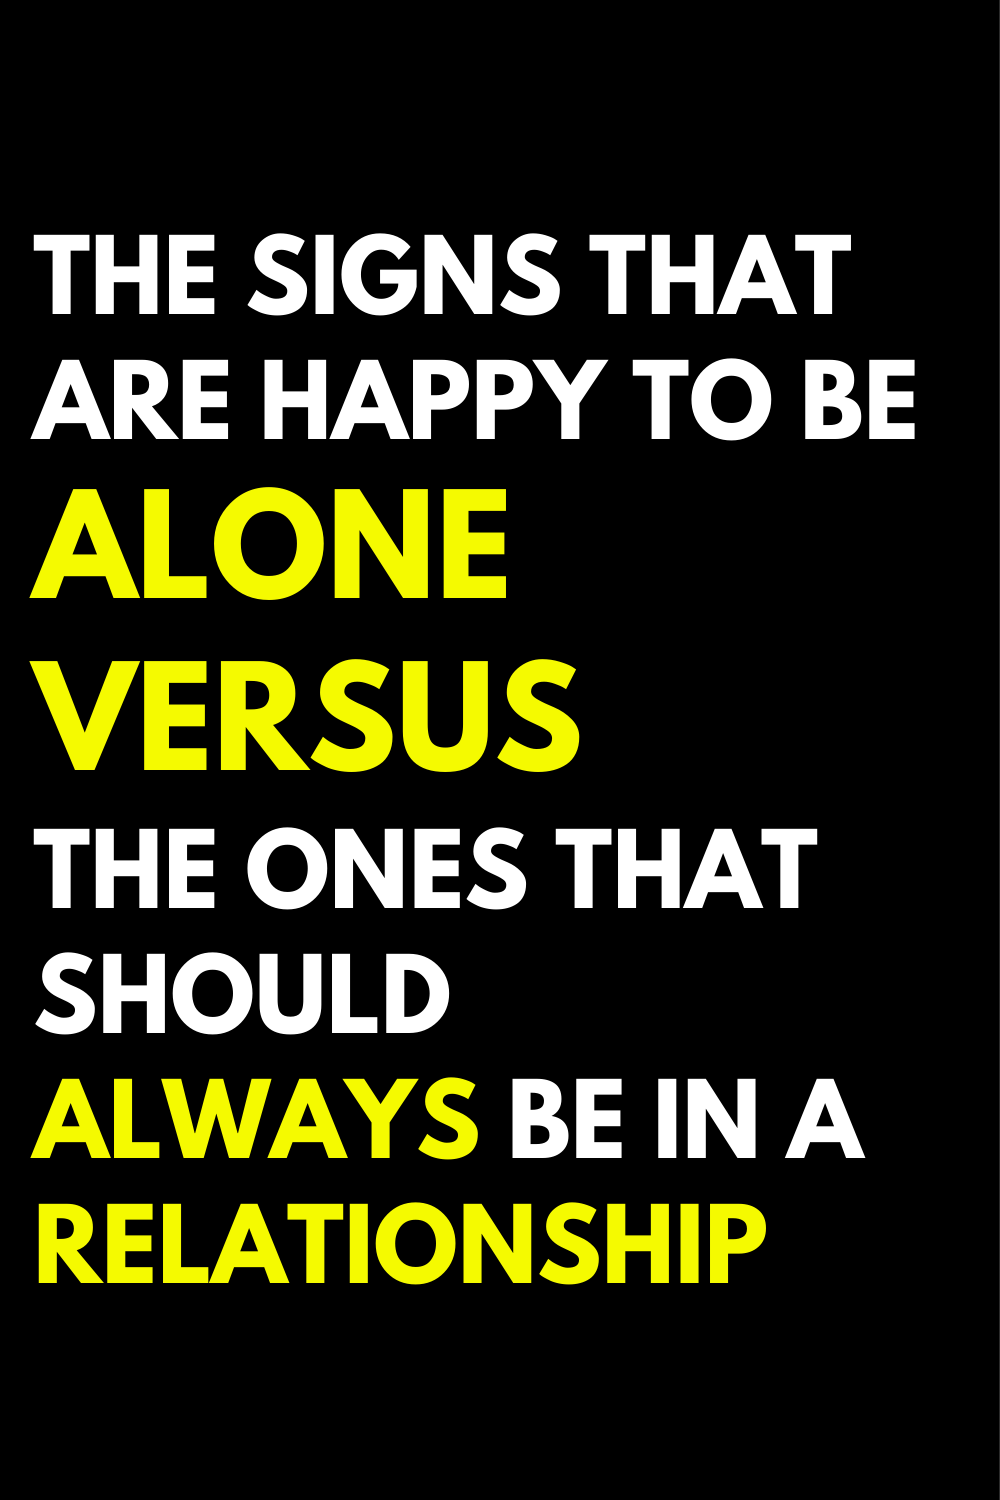 The signs that are happy to be alone versus the ones that should always be in a relationship